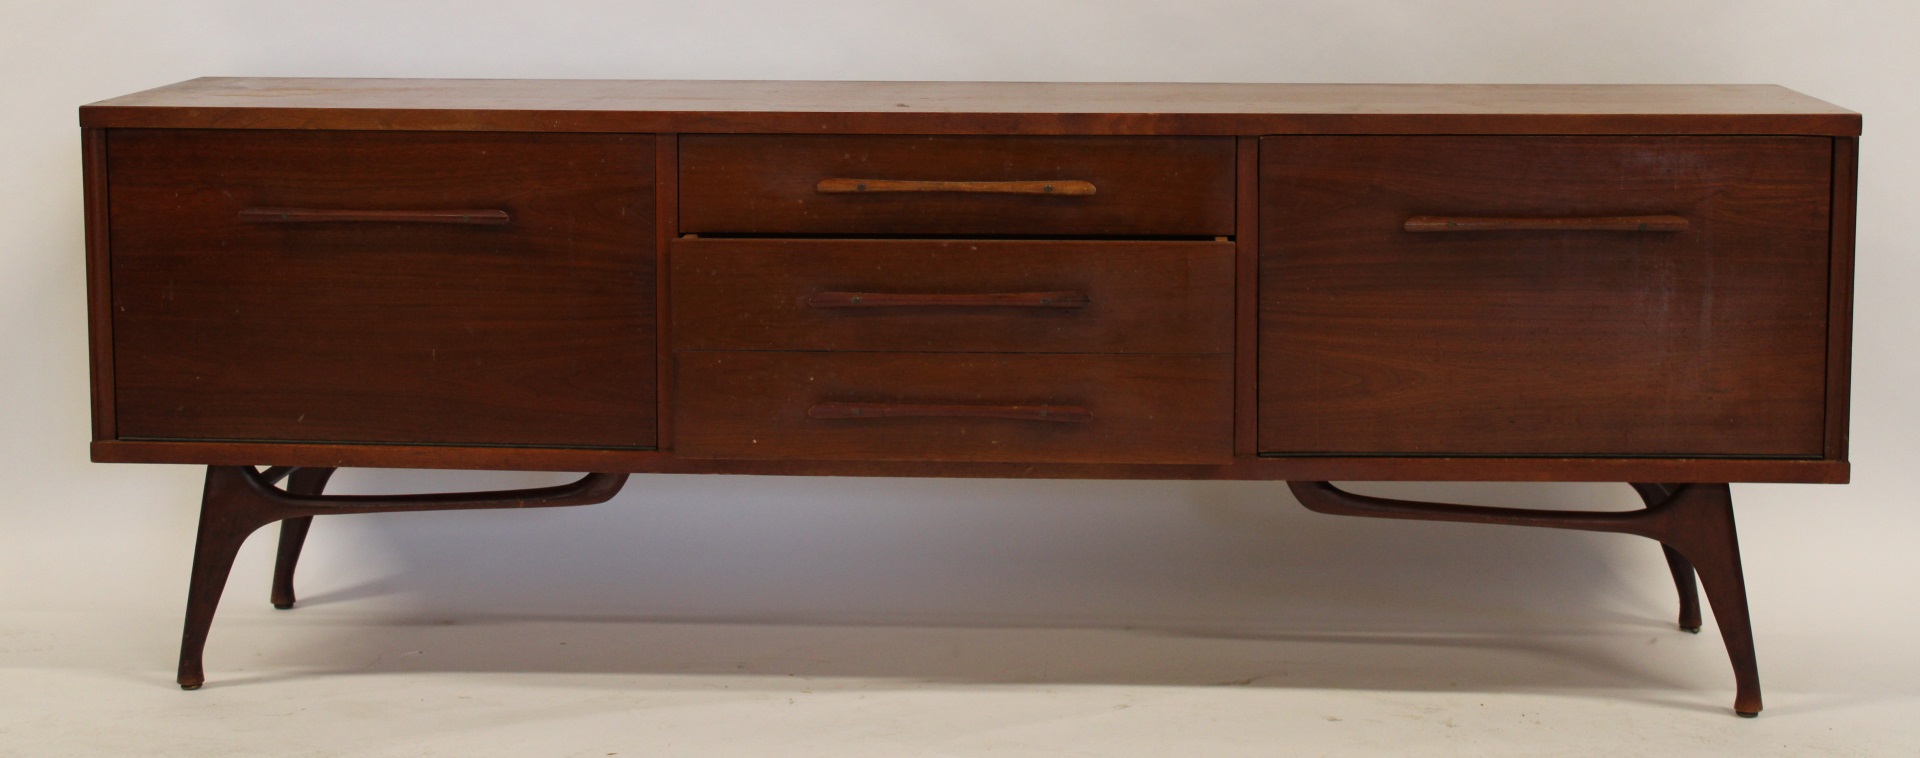 MIDCENTURY SERVER From an East 3bafed